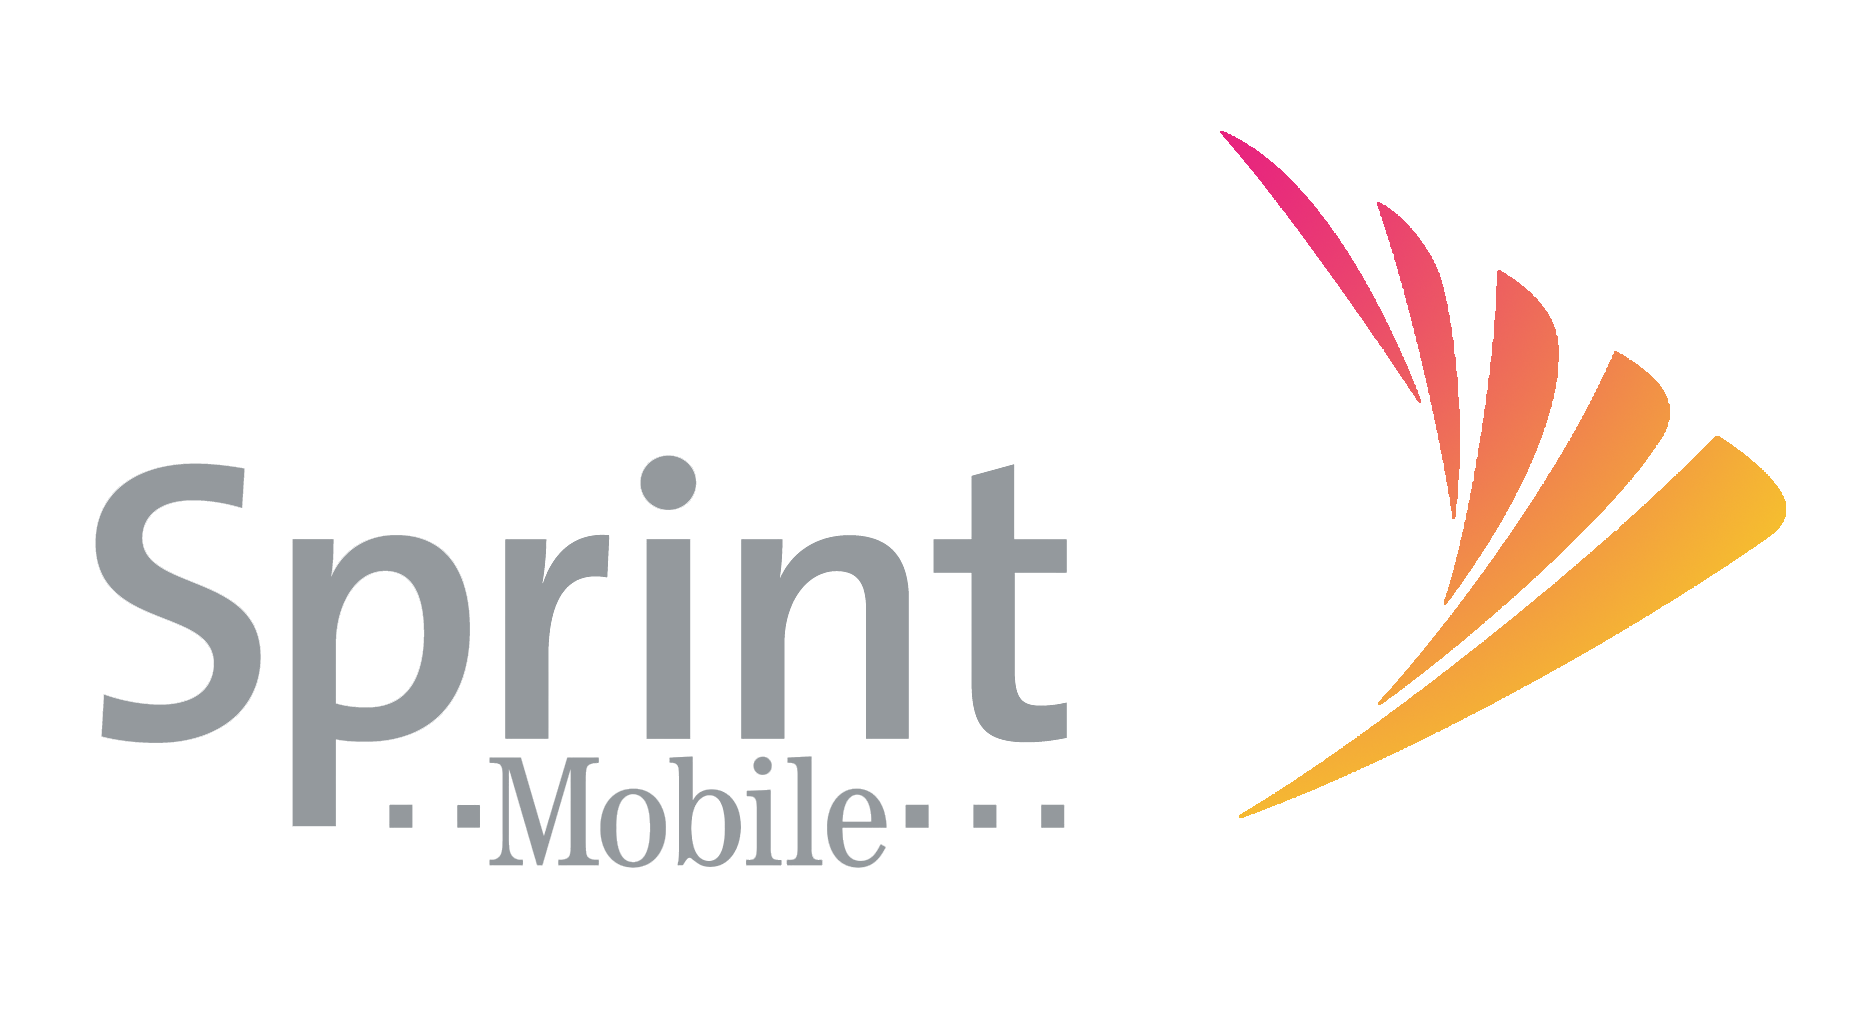 T-Mobile-Sprint Merger Receives Surprising Apathy to FCC